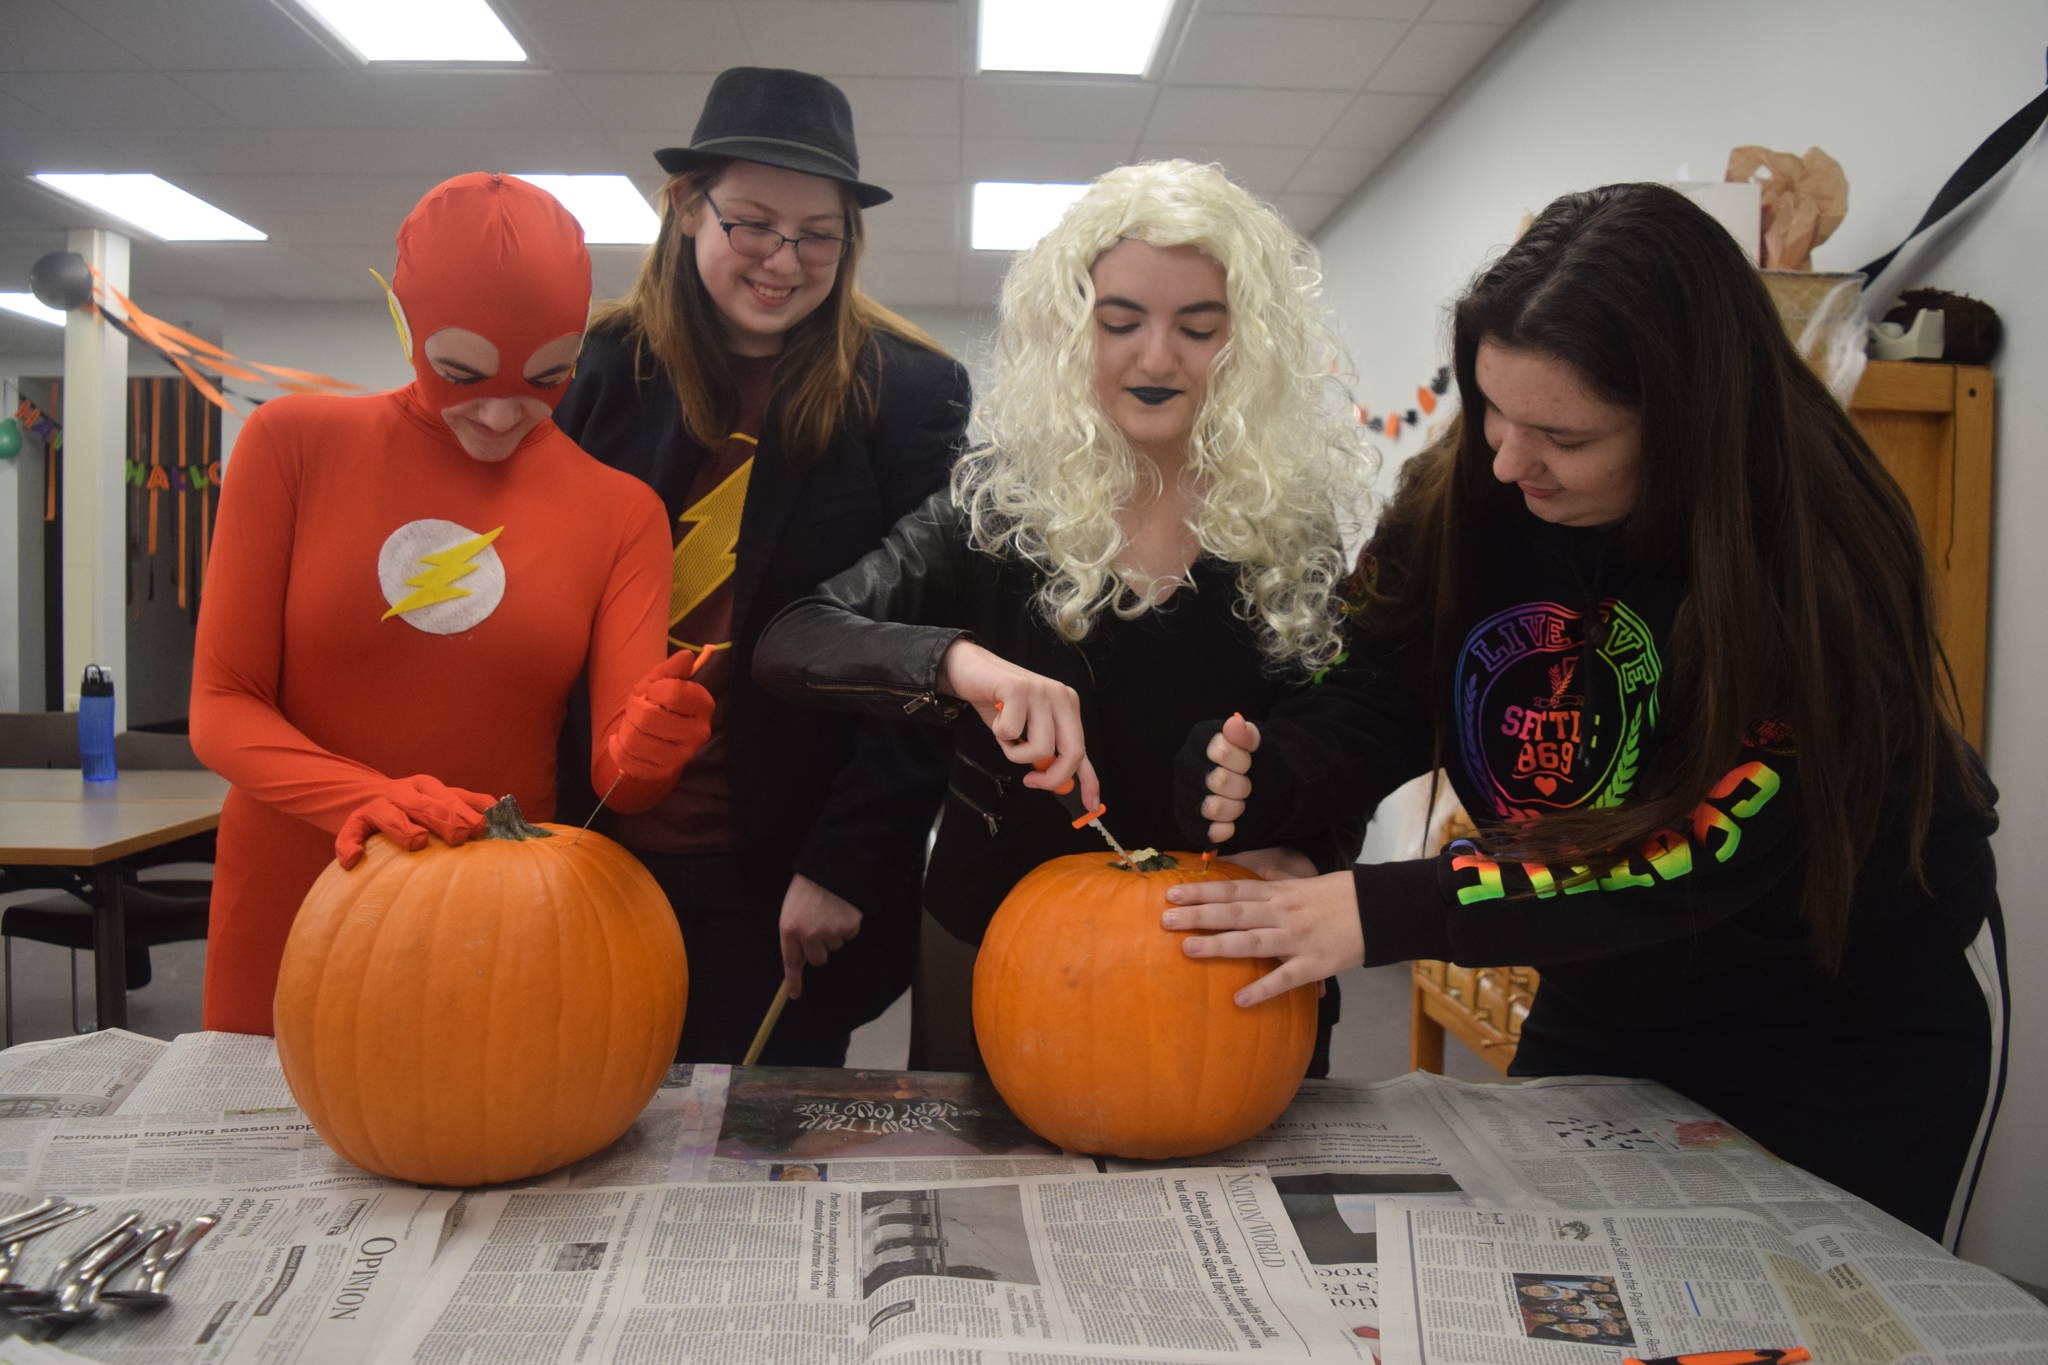 Tori Giles, left, Emilie Grimes, Torile Giles and Arin Reger carve pumkings at the Soldotna Public Library on Saturday, October 21, 2017 during the library’s teen halloween party. The group donned costumes from The Flash, including The Flash, Killer Frost and Harrison Wells. (Photo by Kat Sorensen/Peninsula Clarion)